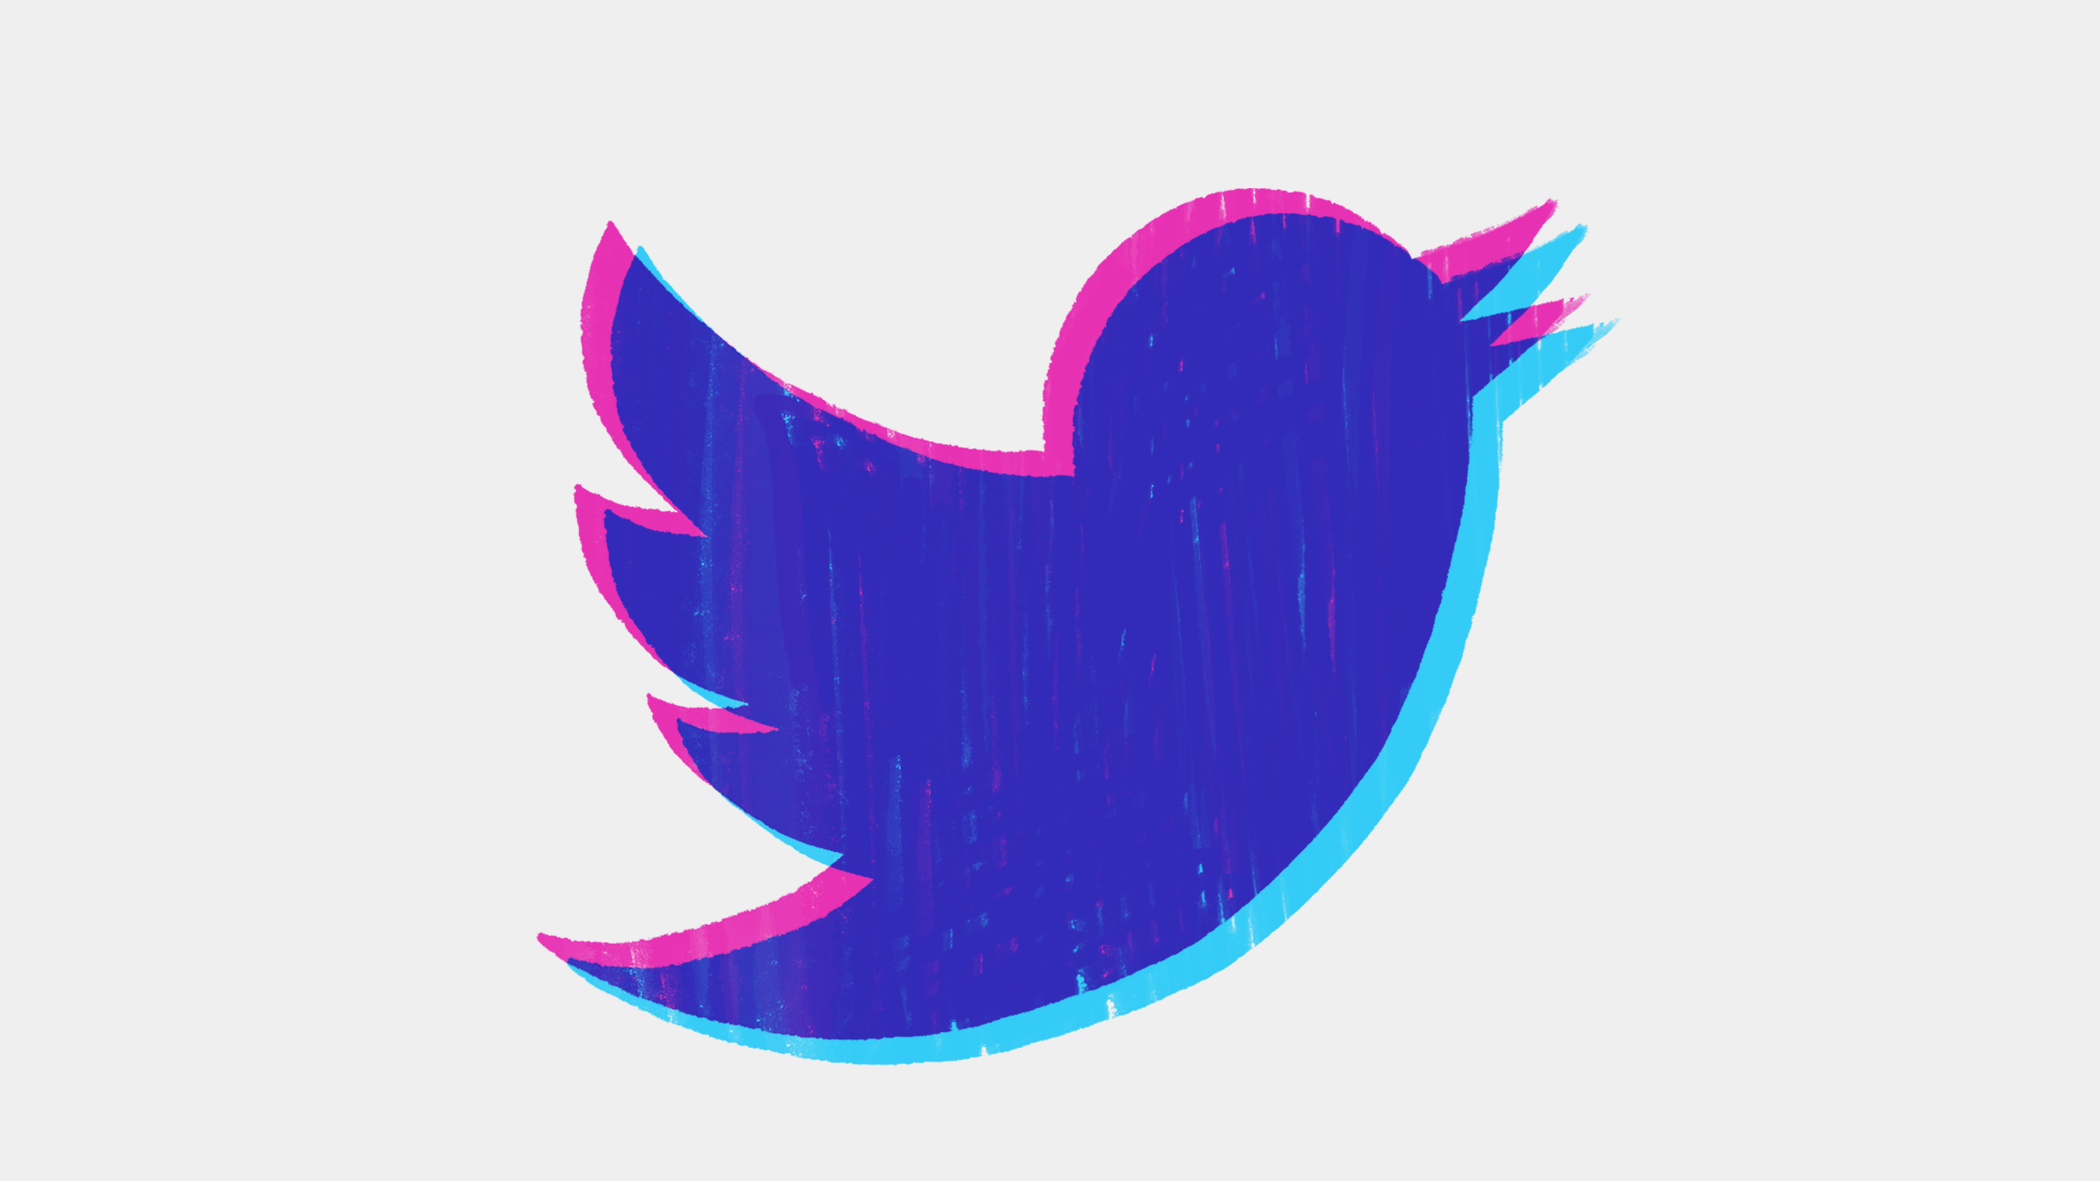 The Twitter bird logo in a vibrant purple color. 